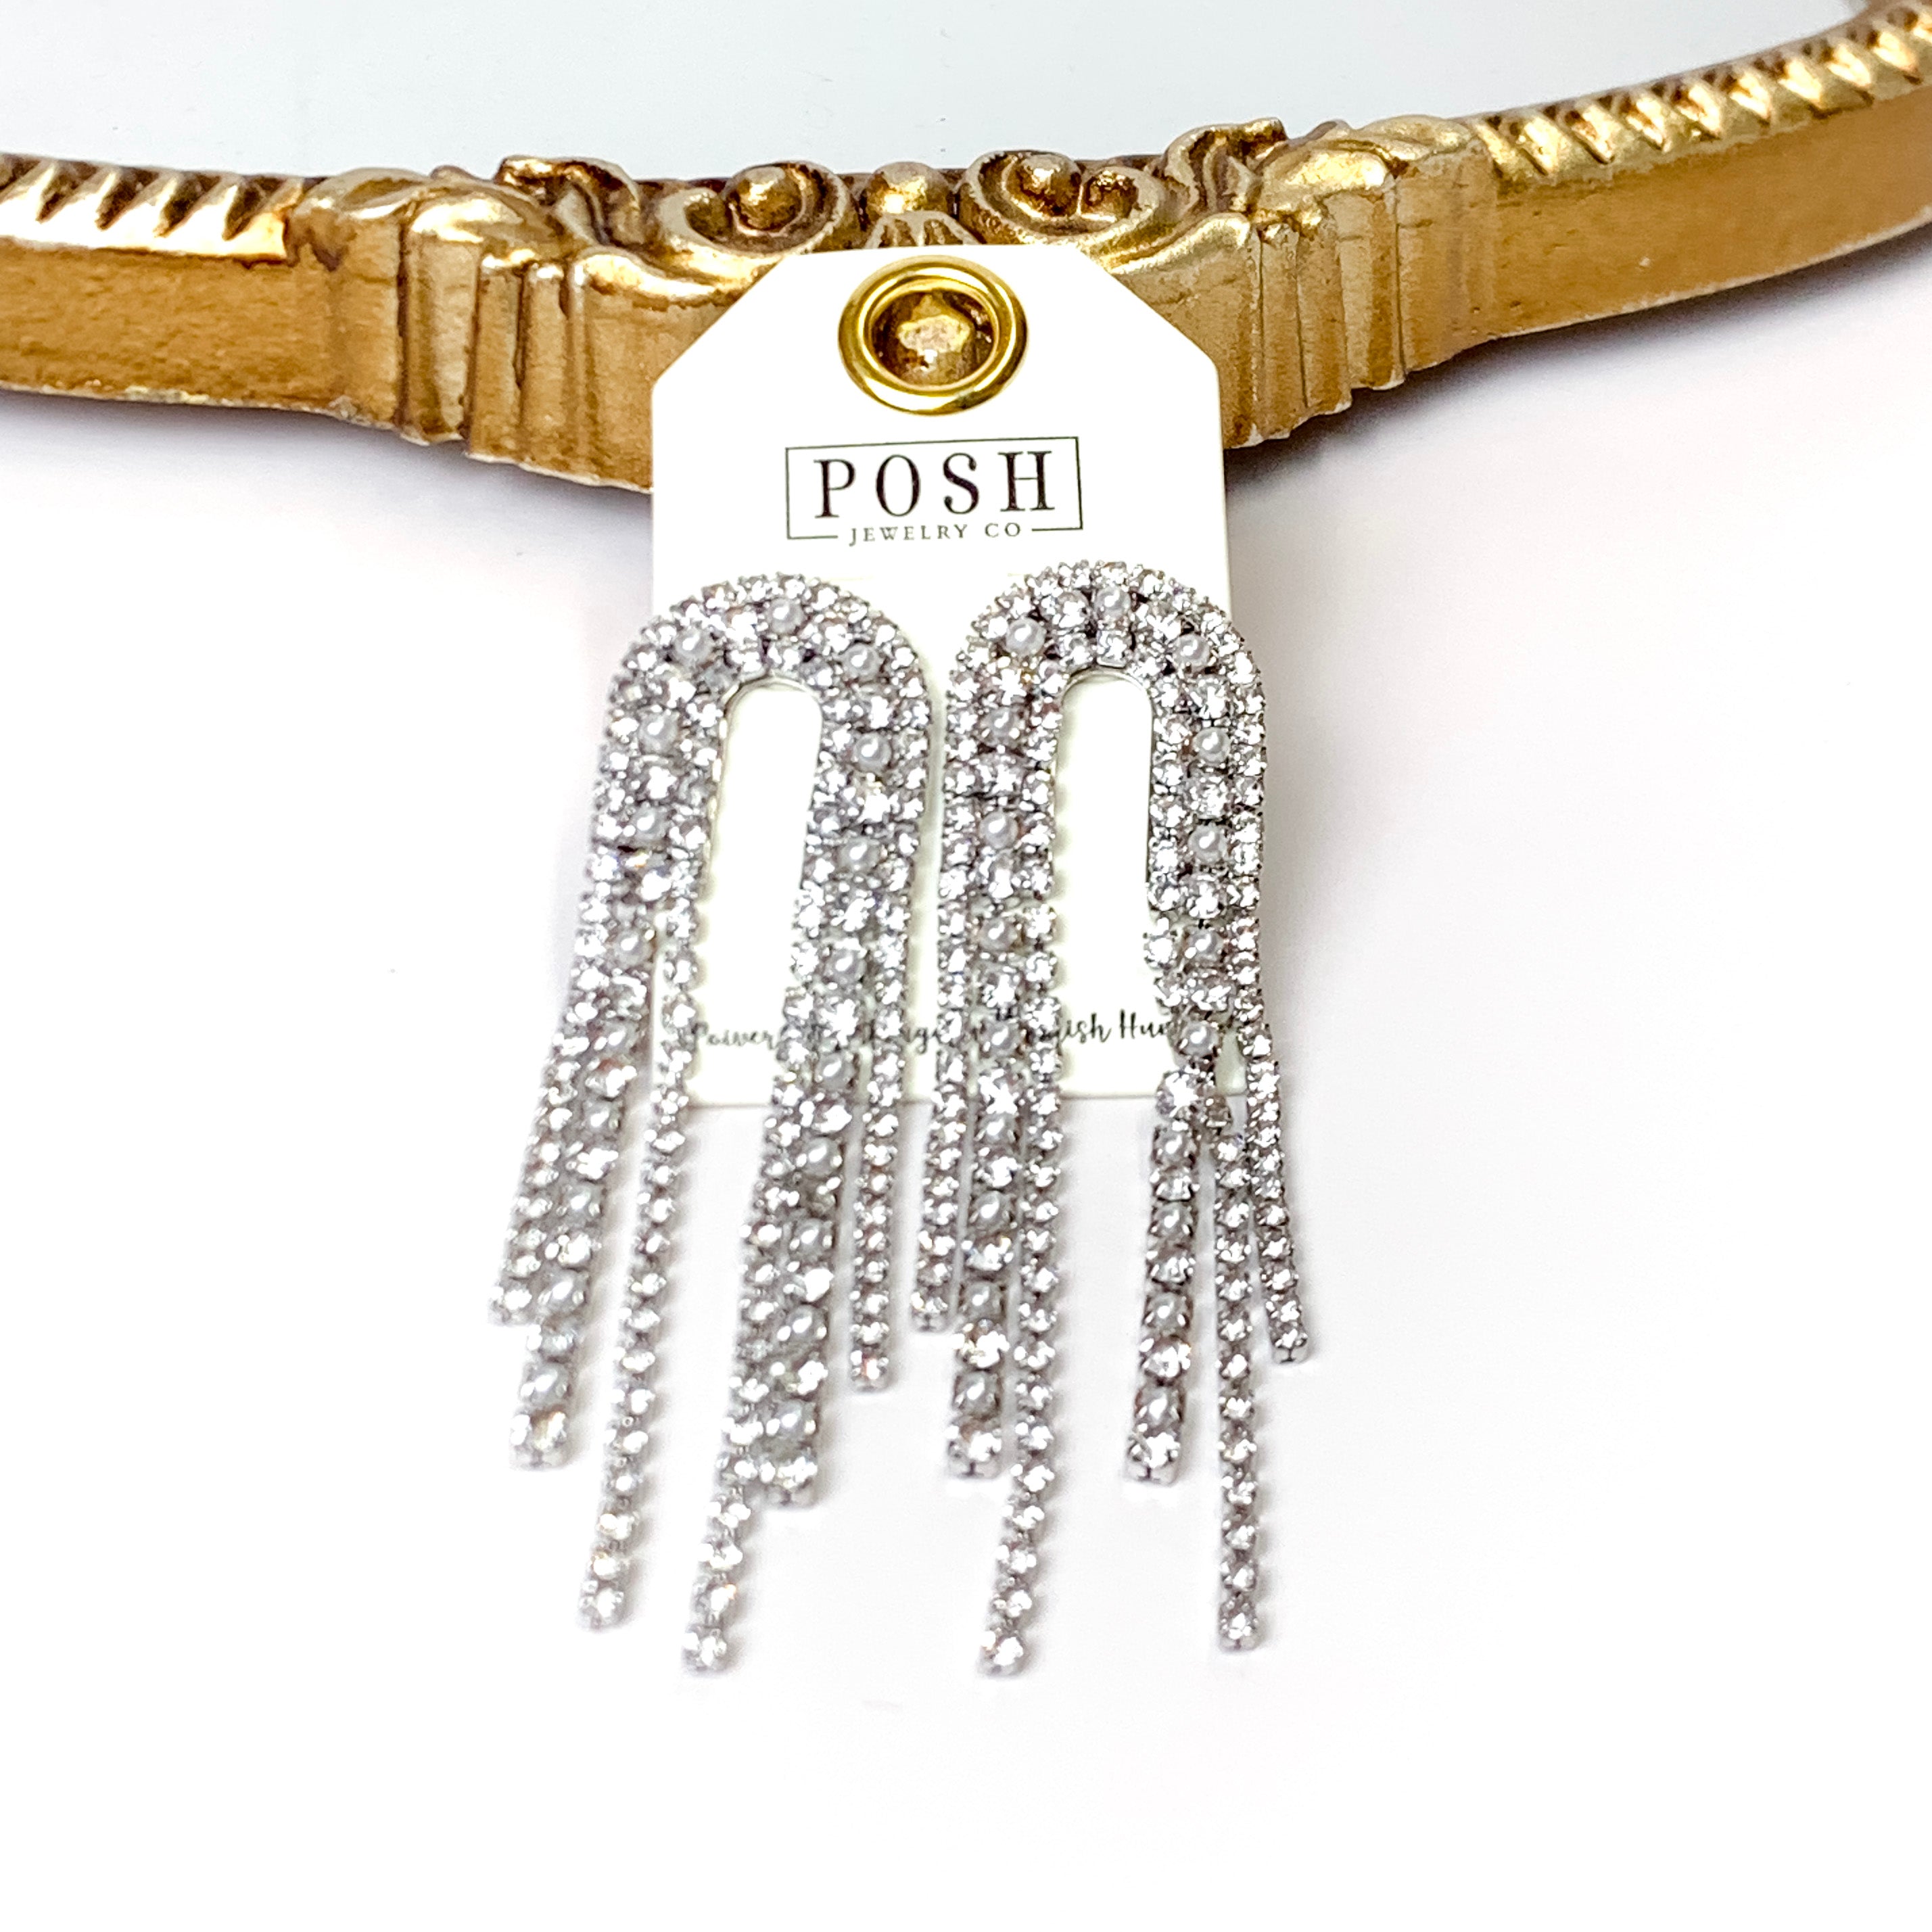 Posh By Pink Panache | Arched Fringe Earrings with Pearl Accents in Silver Tone - Giddy Up Glamour Boutique